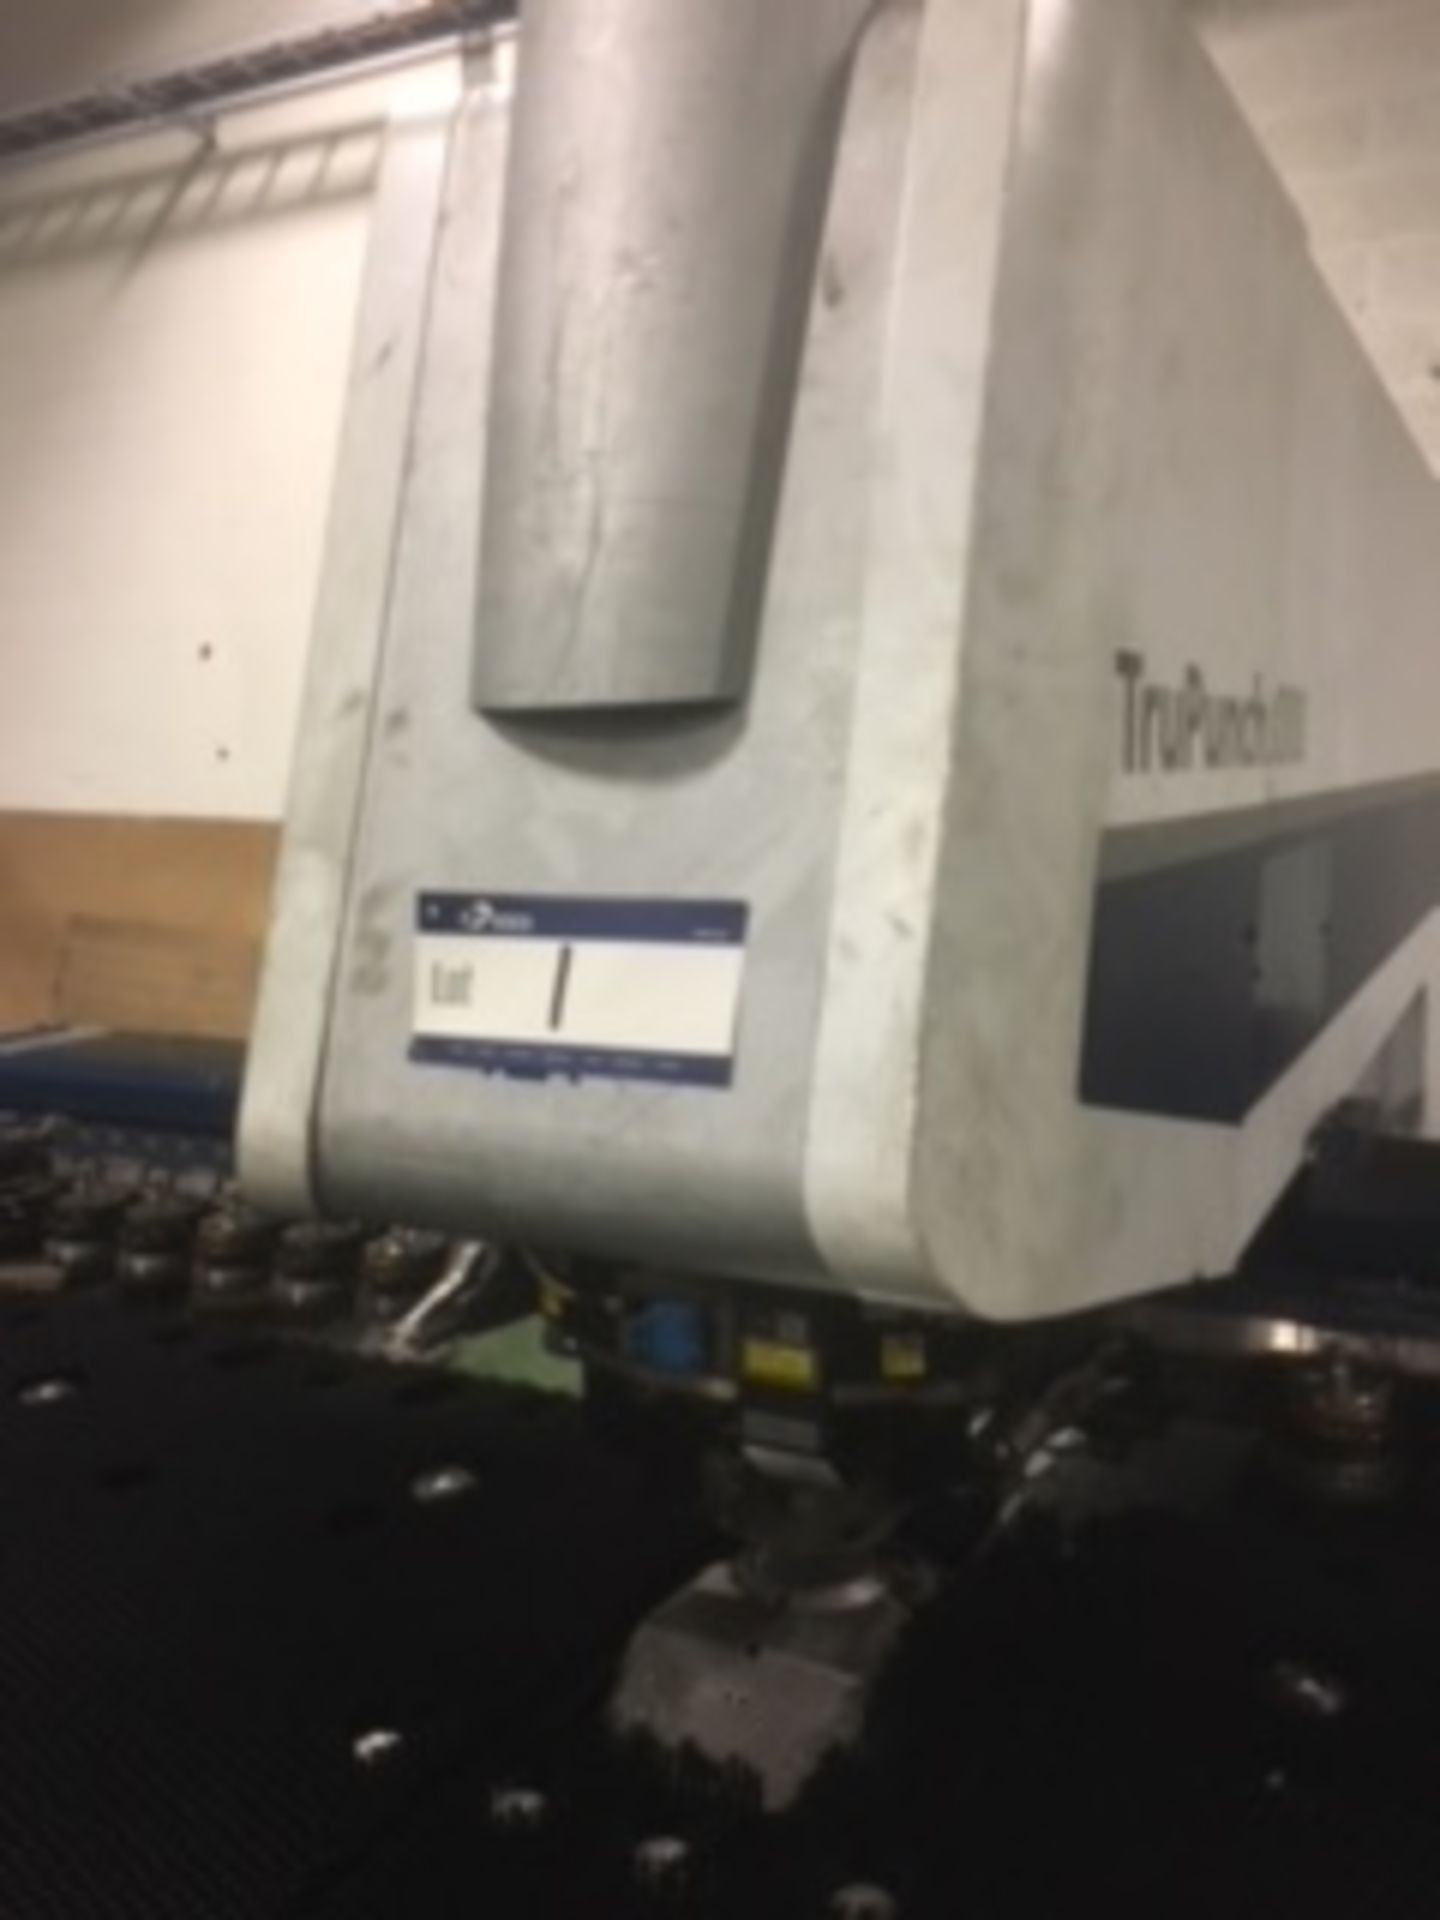 Trumpf TruPunch 3000 Type S11 Universal CNC Punching Machine, serial no. A0035A0229, year of - Image 19 of 24